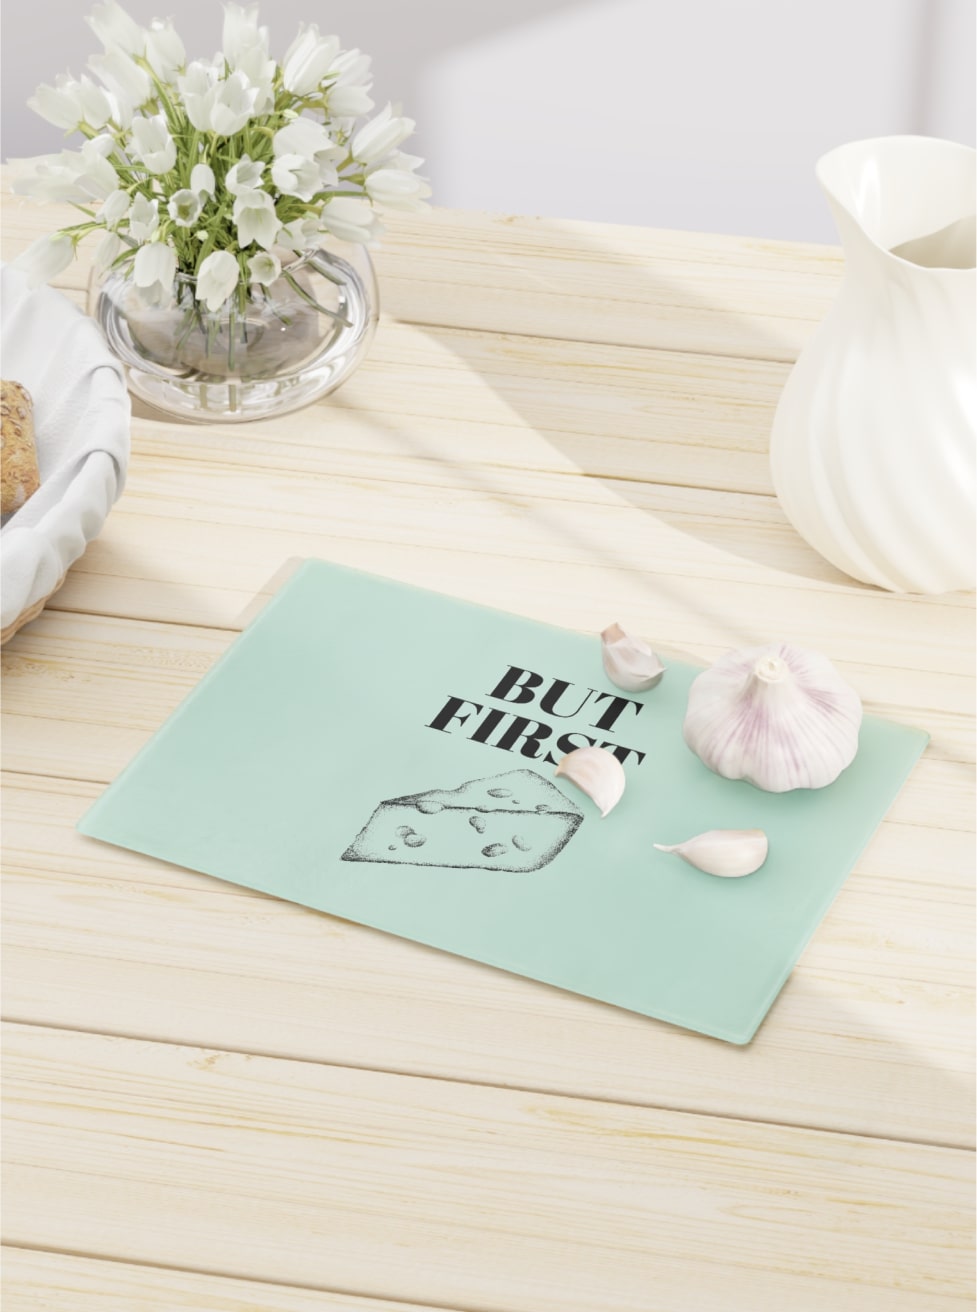 A glass cutting board customized with a sliced cheese design and the “But First” phrase over a wooden table